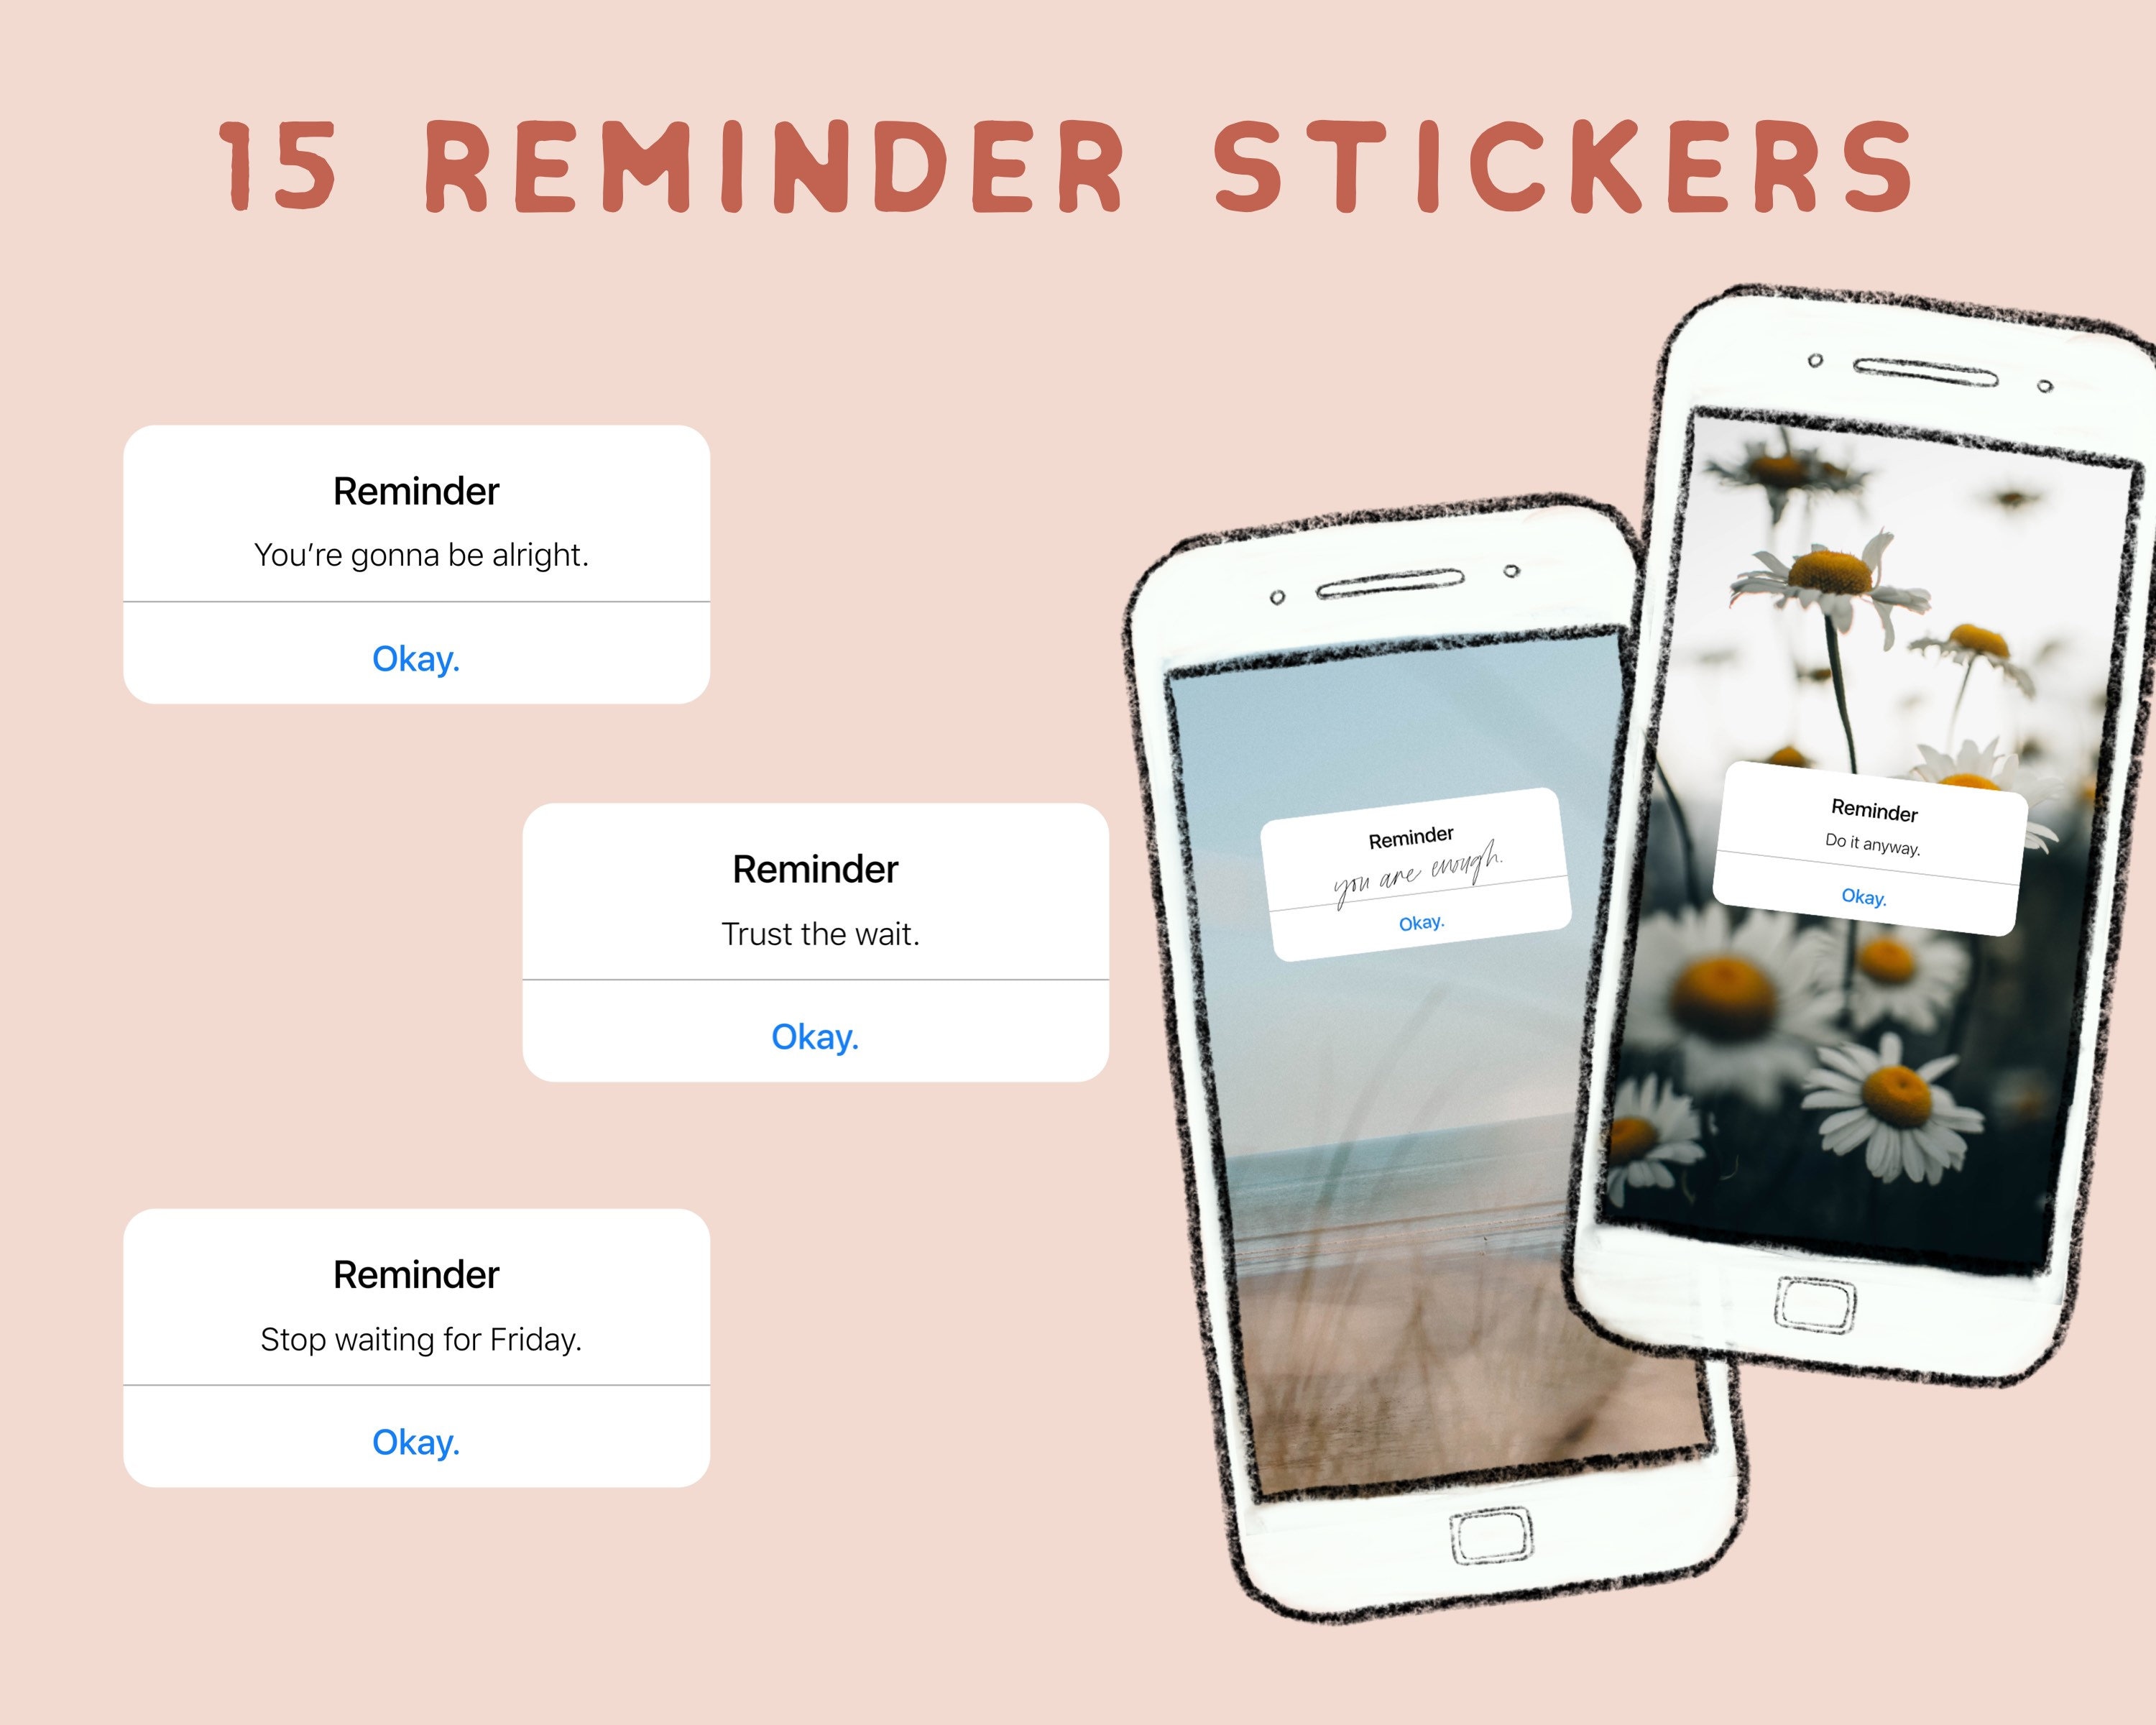 Recordatorio Friendly Reminder Sticker for iOS & Android